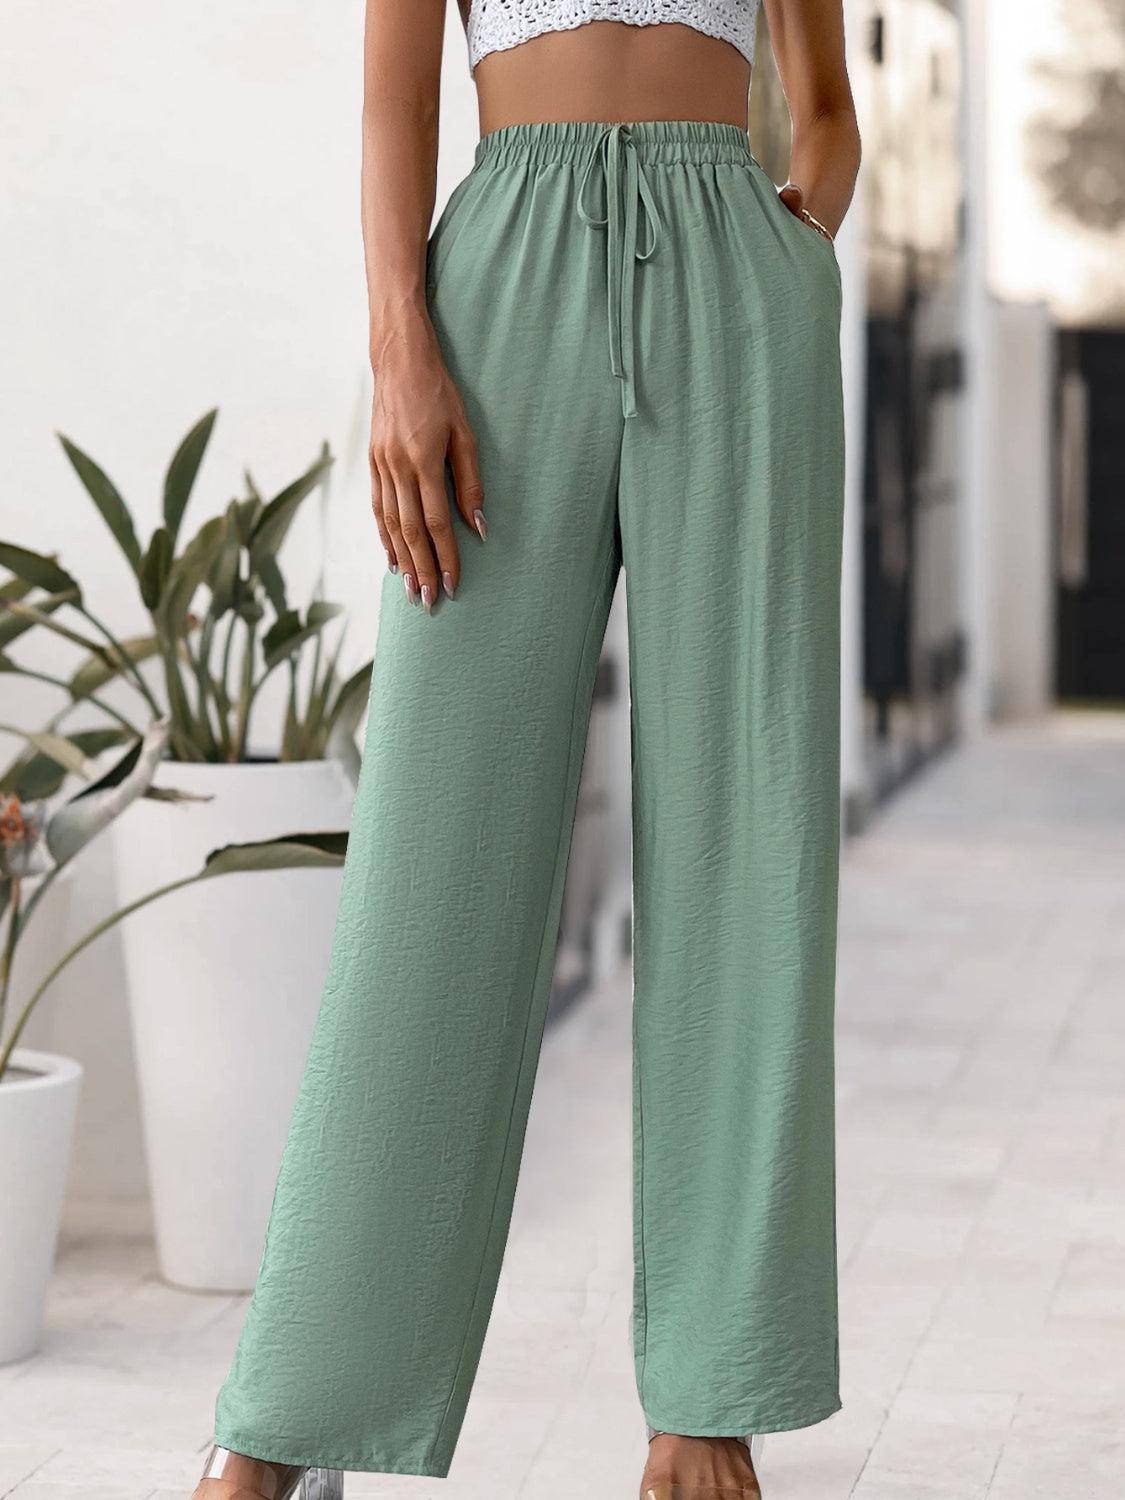 a woman wearing a crop top and green pants